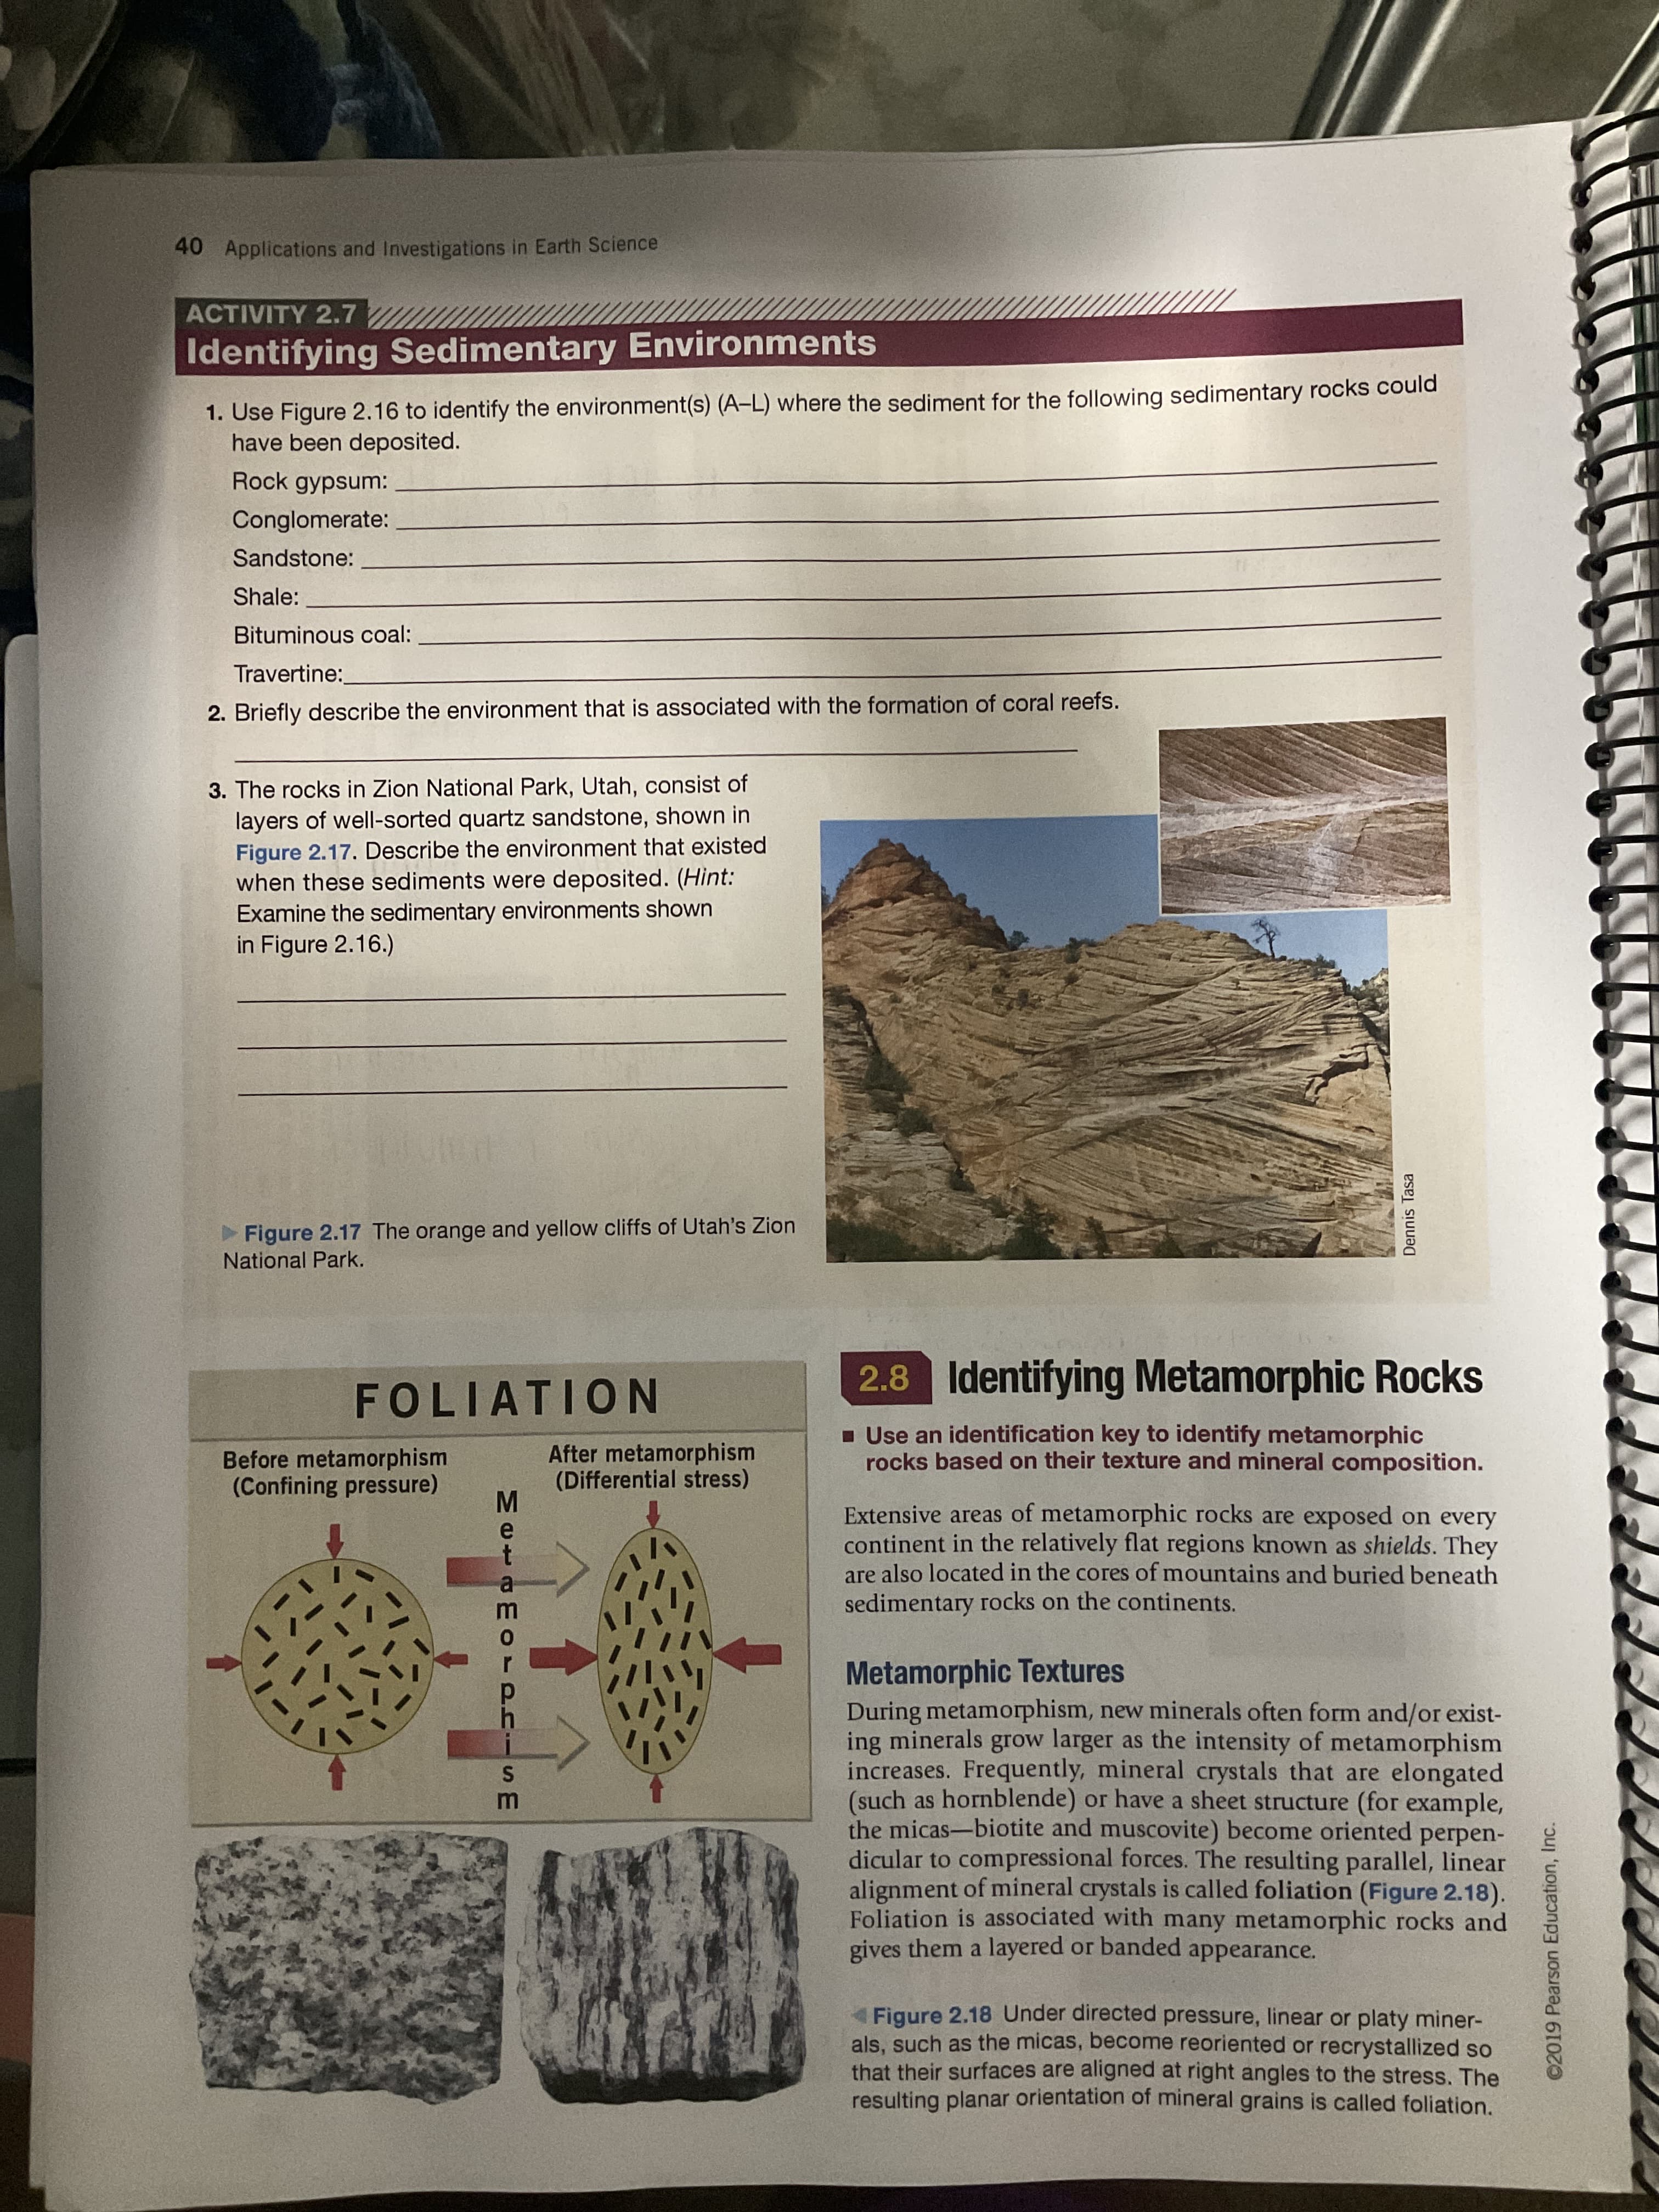 Matam OTPriE
Dennis Tasa
©2019 Pearson Education, Inc.
40 Applications and Investigations in Earth Science
ACTIVITY 2.7
Identifying Sedimentary Environments
1. Use Figure 2.16 to identify the environment(s) (A-L) where the sediment for the following sedimentary rocks could
have been deposited.
Rock gypsum:
Conglomerate:
Sandstone:
Shale:
Bituminous coal:
Travertine:
2. Briefly describe the environment that is associated with the formation of coral reefs.
3. The rocks in Zion National Park, Utah, consist of
layers of well-sorted quartz sandstone, shown in
Figure 2.17. Describe the environment that existed
when these sediments were deposited. (Hint:
Examine the sedimentary environments shown
in Figure 2.16.)
Figure 2.17 The orange and yellow cliffs of Utah's Zion
National Park.
FOLIATION
2.8 Identifying Metamorphic Rocks
Before metamorphism
(Confining pressure)
After metamorphism
(Differential stress)
- Use an identification key to identify metamorphic
rocks based on their texture and mineral composition.
Extensive areas of metamorphic rocks are exposed on every
continent in the relatively flat regions known as shields. They
are also located in the cores of mountains and buried beneath
sedimentary rocks on the continents.
Metamorphic Textures
During metamorphism, new minerals often form and/or exist-
ing minerals grow larger as the intensity of metamorphism
increases. Frequently, mineral crystals that are elongated
(such as hornblende) or have a sheet structure (for example,
the micas-biotite and muscovite) become oriented perpen-
dicular to compressional forces. The resulting parallel, linear
alignment of mineral crystals is called foliation (Figure 2.18).
Foliation is associated with many metamorphic rocks and
gives them a layered or banded appearance.
Figure 2.18 Under directed pressure, linear or platy miner-
als, such as the micas, become reoriented or recrystallized so
that their surfaces are aligned at right angles to the stress. The
resulting planar orientation of mineral grains is called foliation.
